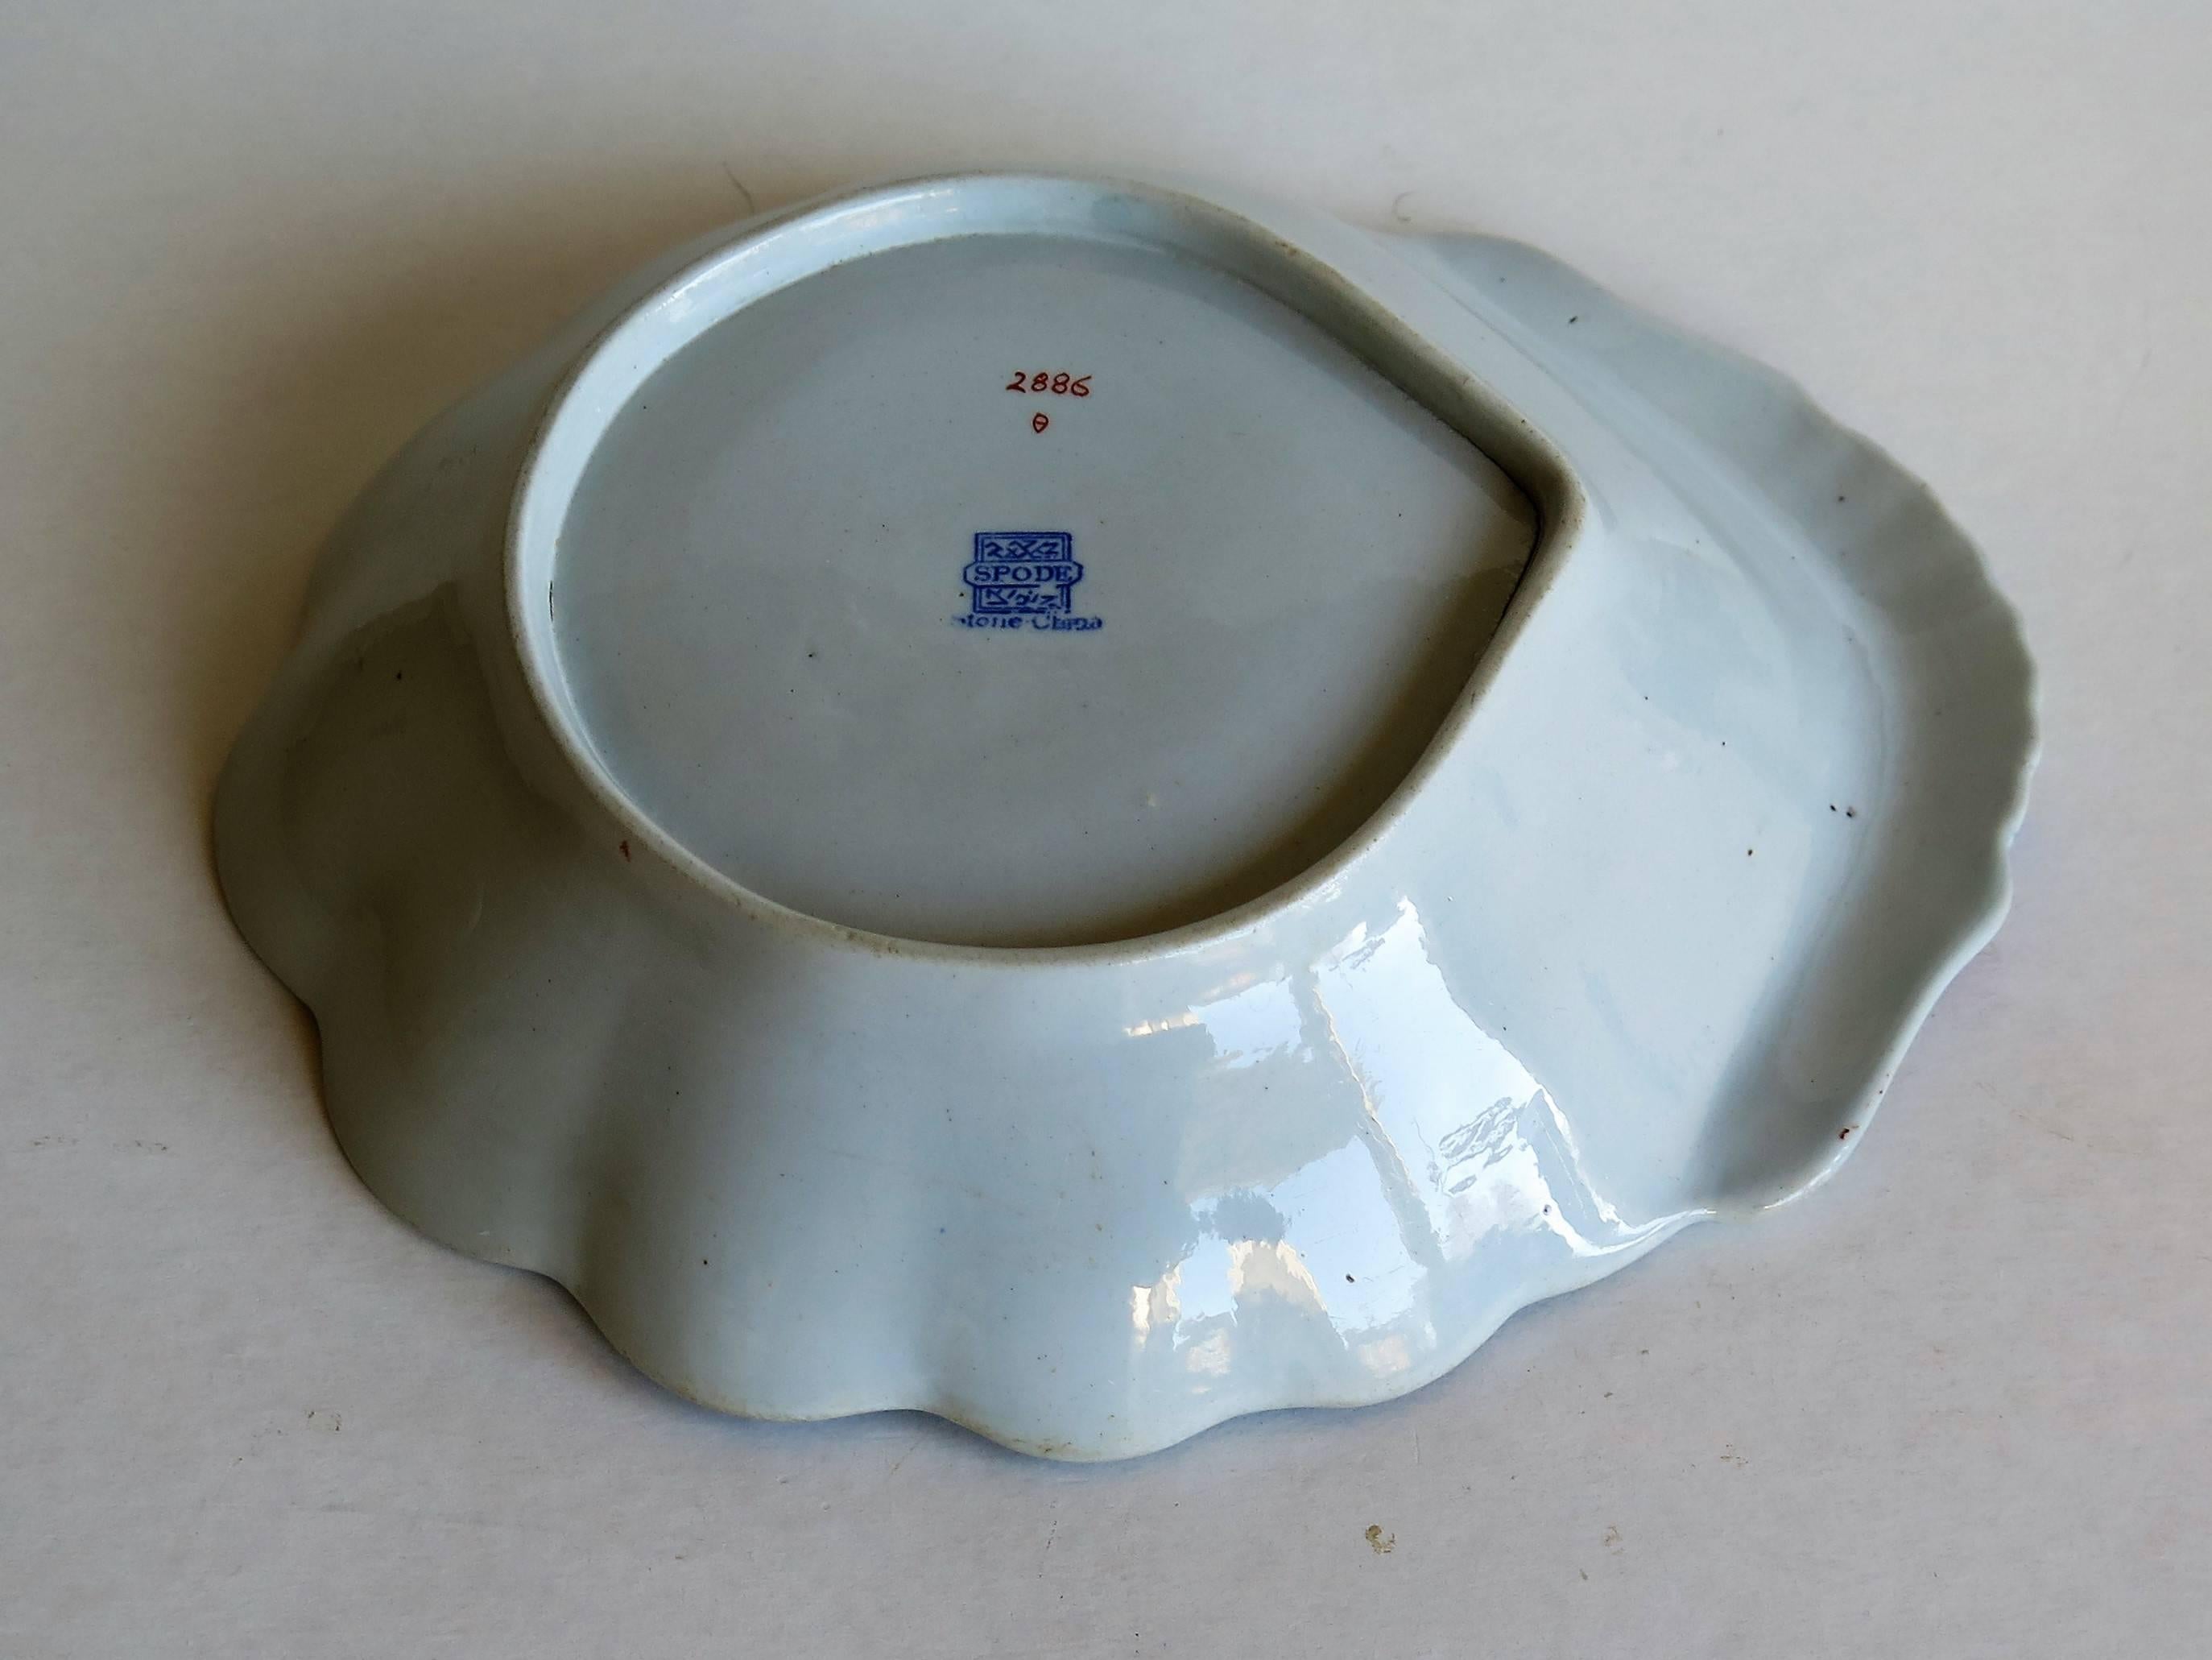 Georgian Spode Ironstone Shell Dish or Plate Bang Up Pattern No. 2886, Ca 1820 In Good Condition For Sale In Lincoln, Lincolnshire